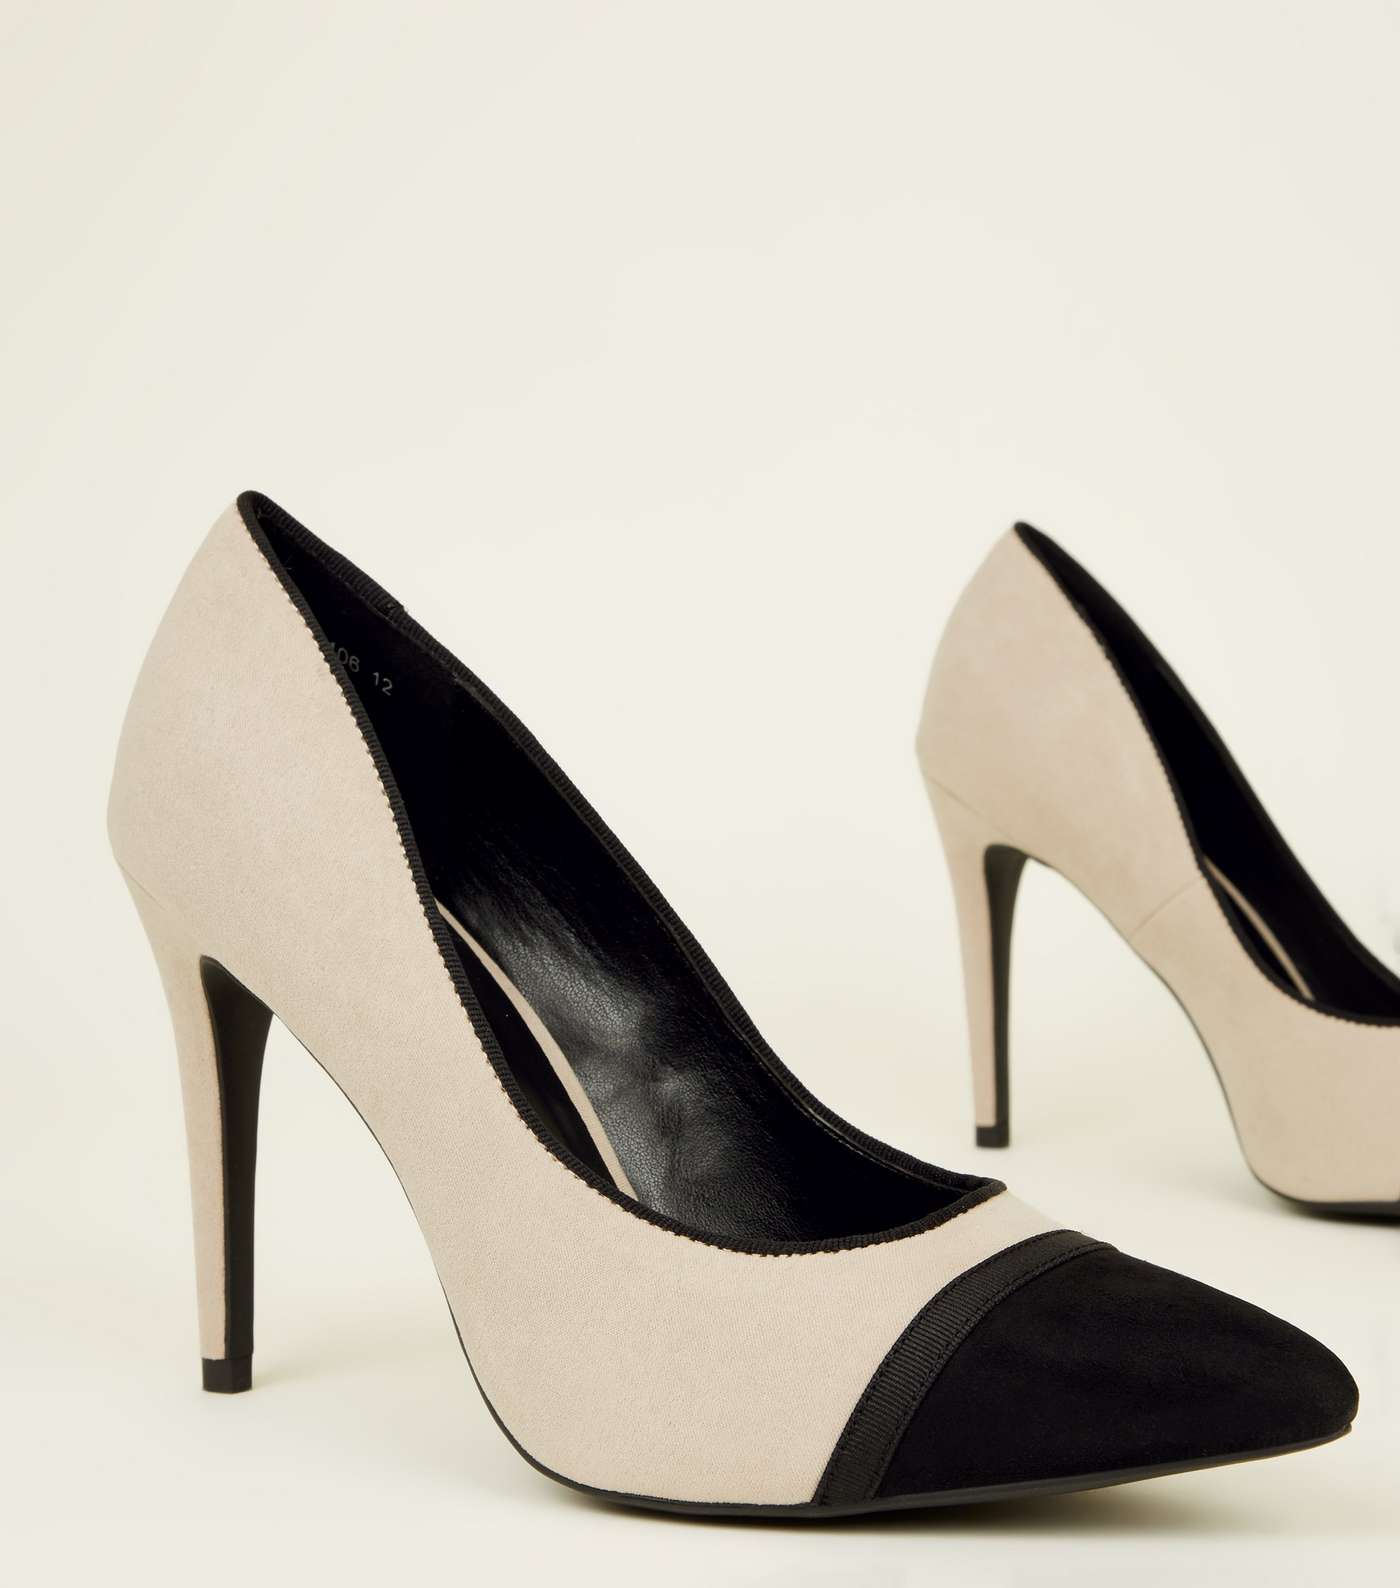 Off White Suedette Contrast Pointed Toe Court Shoes Image 4